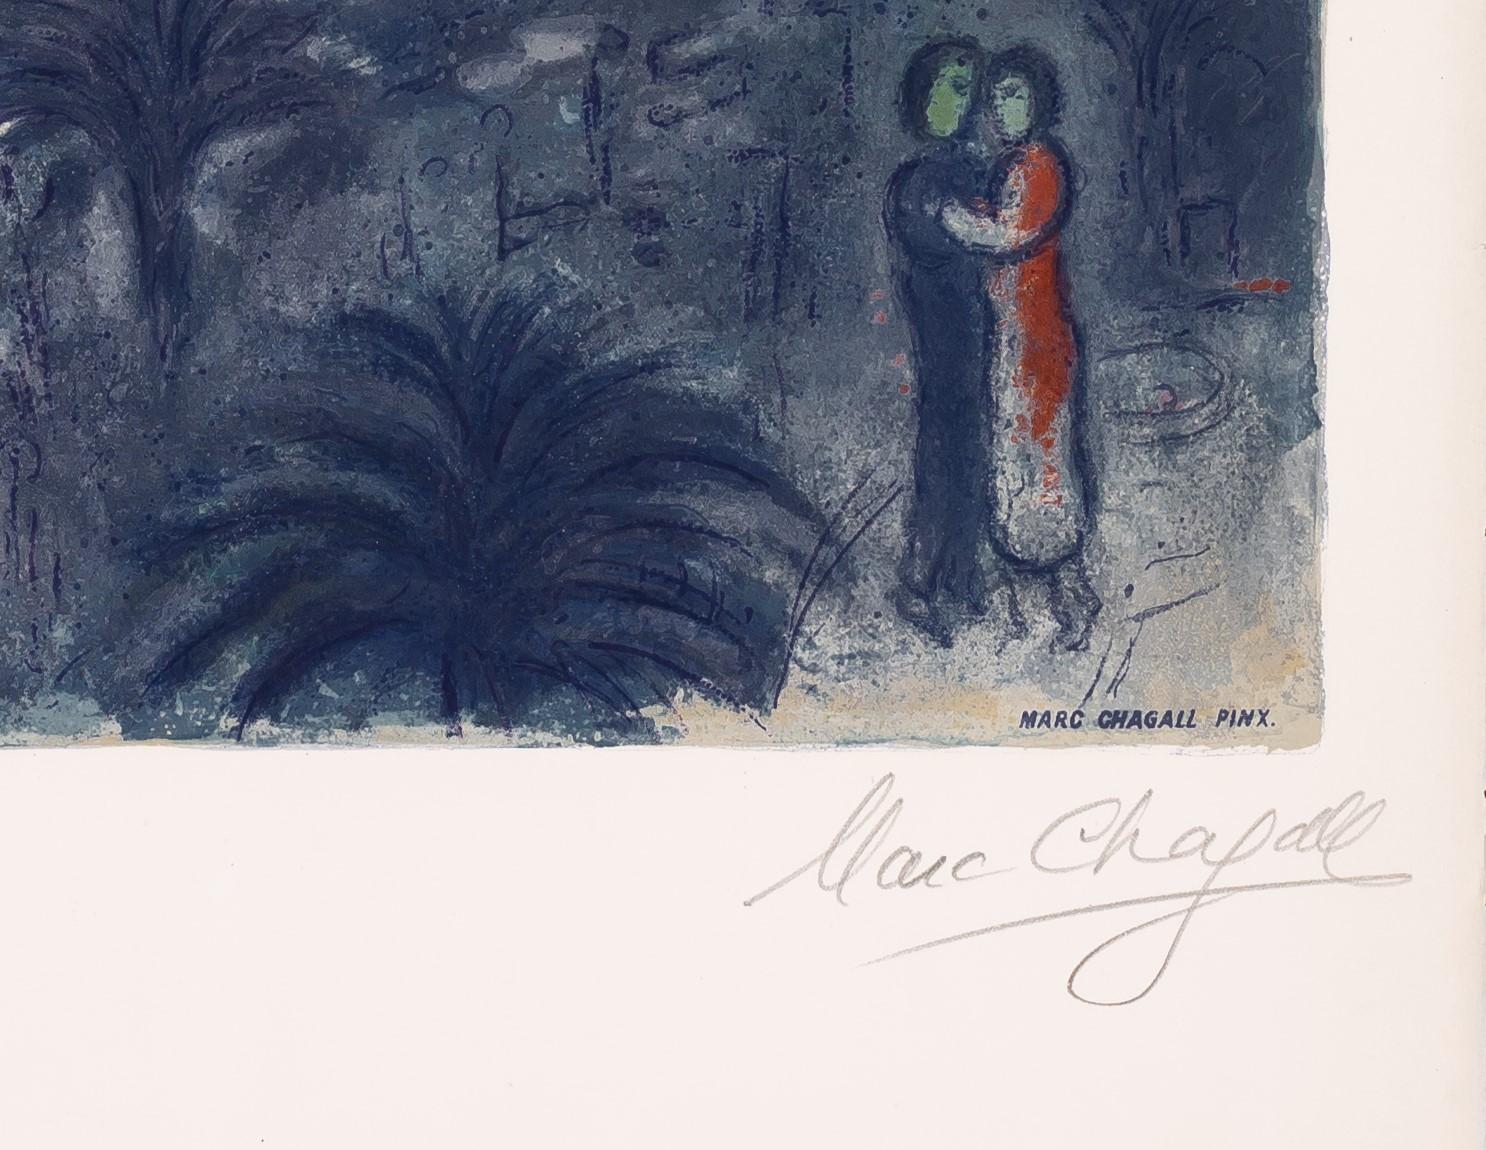 Sunset (CS.26) from Marc Chagall's Nice et la Côte d'Azur suite is a lithograph on paper, signed 'Marc Chagall' lower right and numbered lower left XVI/LXXV, from the edition of 235 (there were also 150 Arabic, and 10 artist proofs, plus a few other